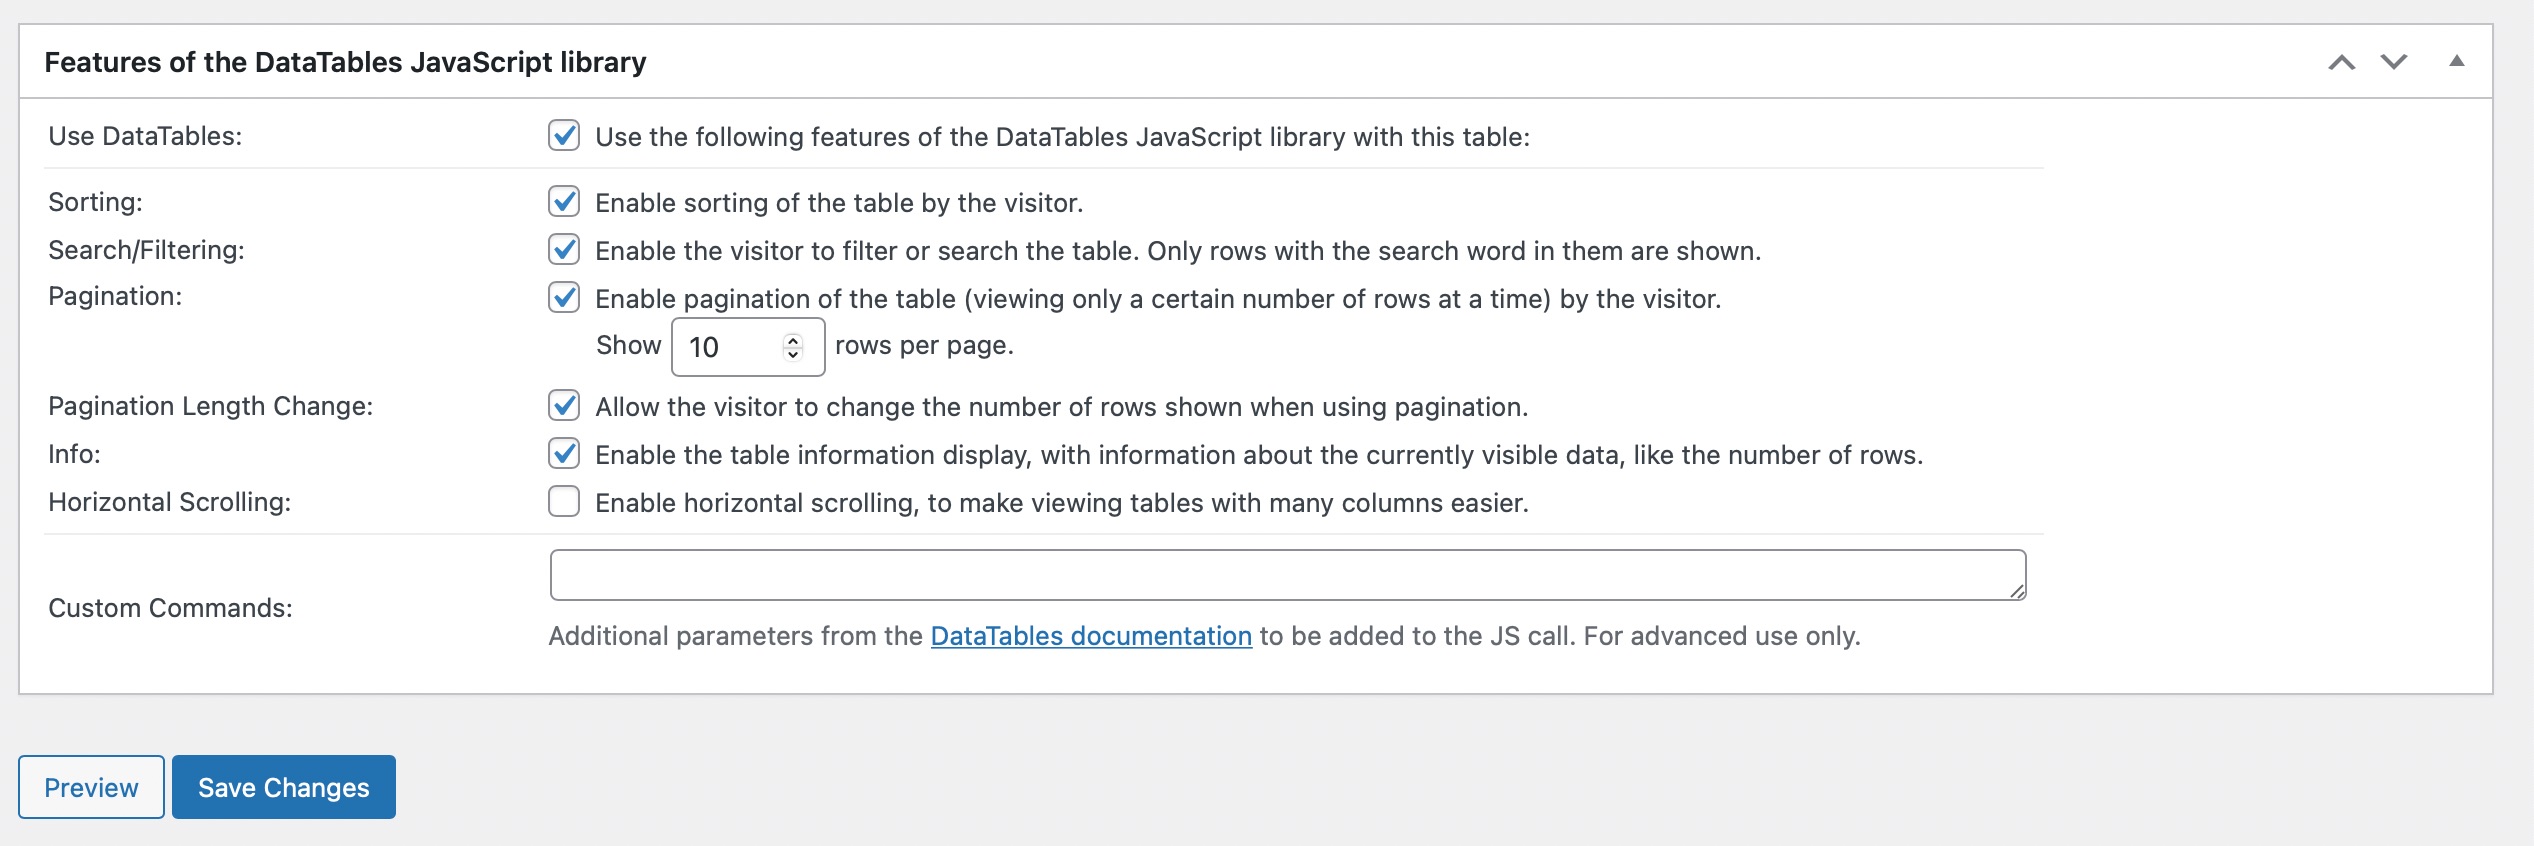 set various options in Features of the DataTables JavaScript library